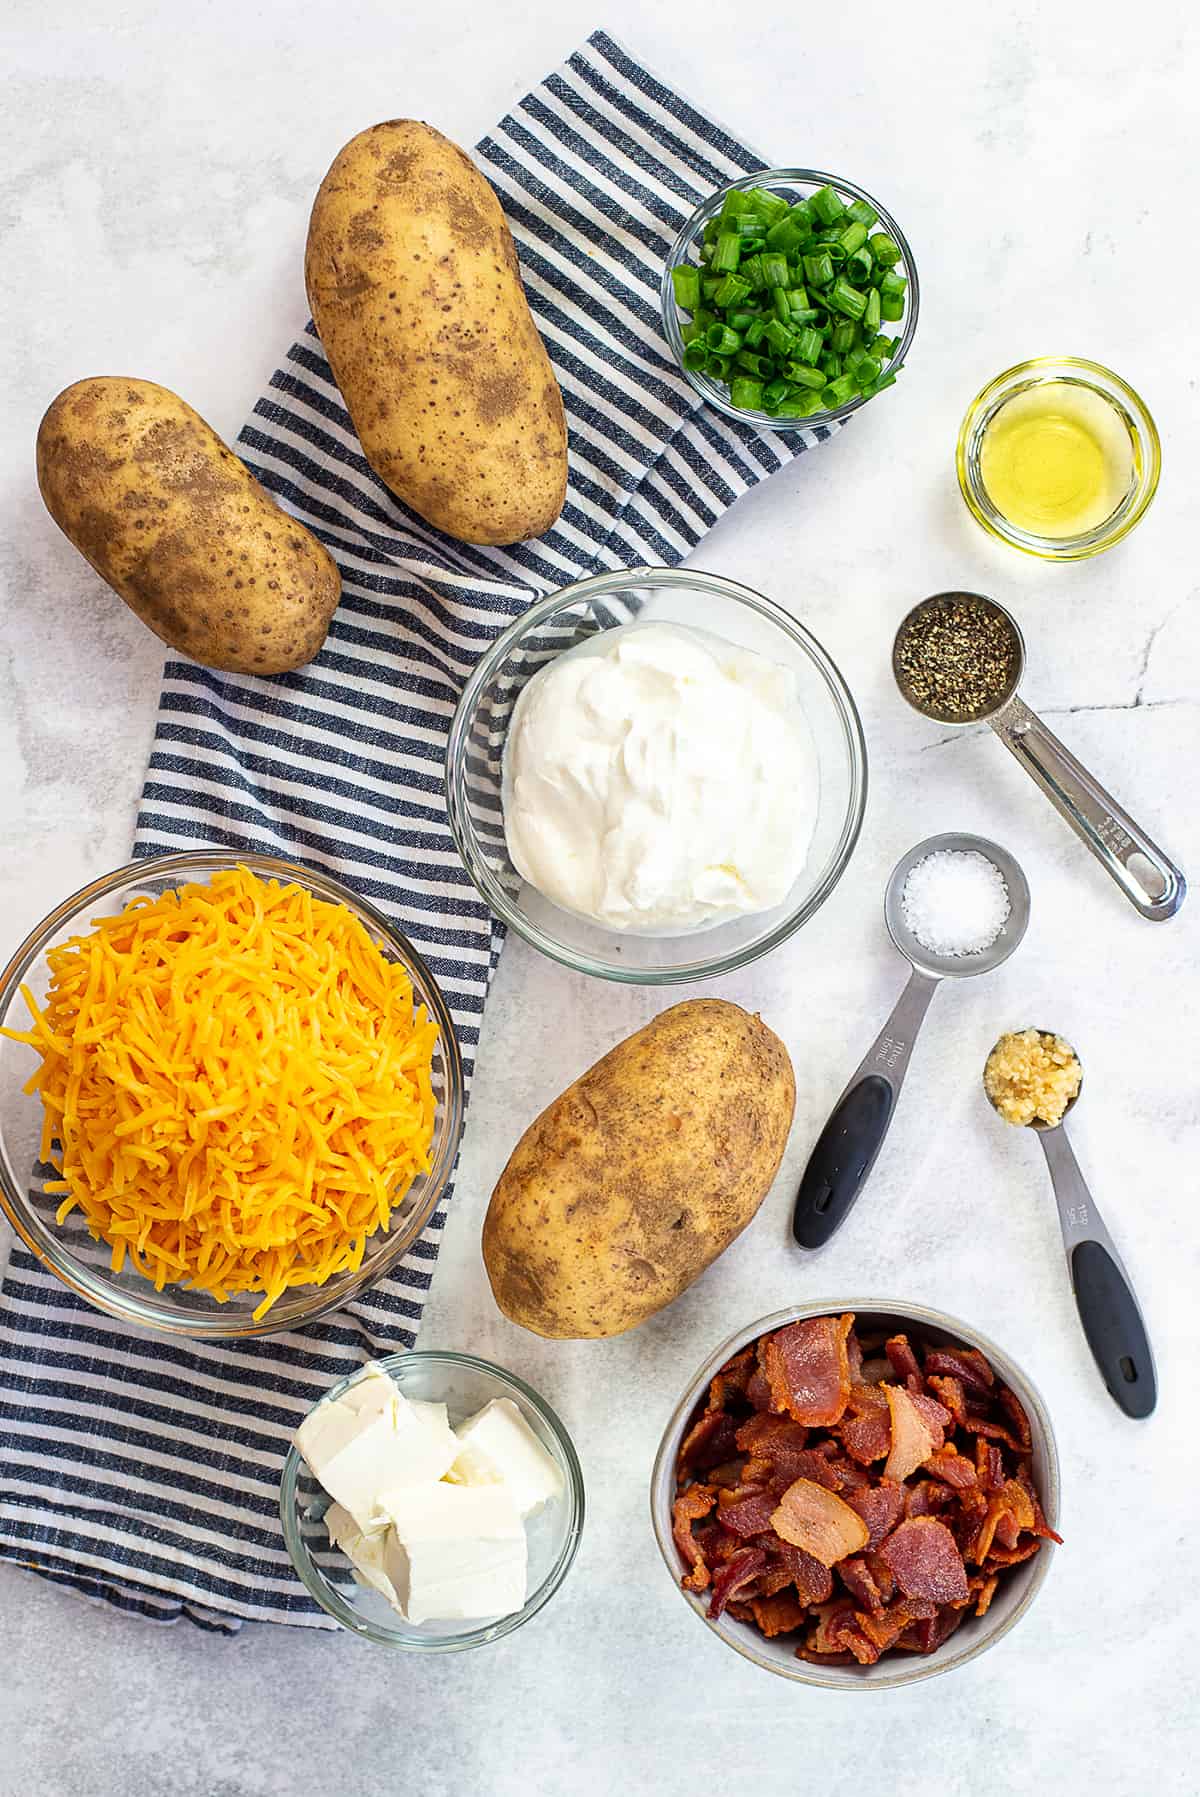 ingredients for baked potato casserole recipe.